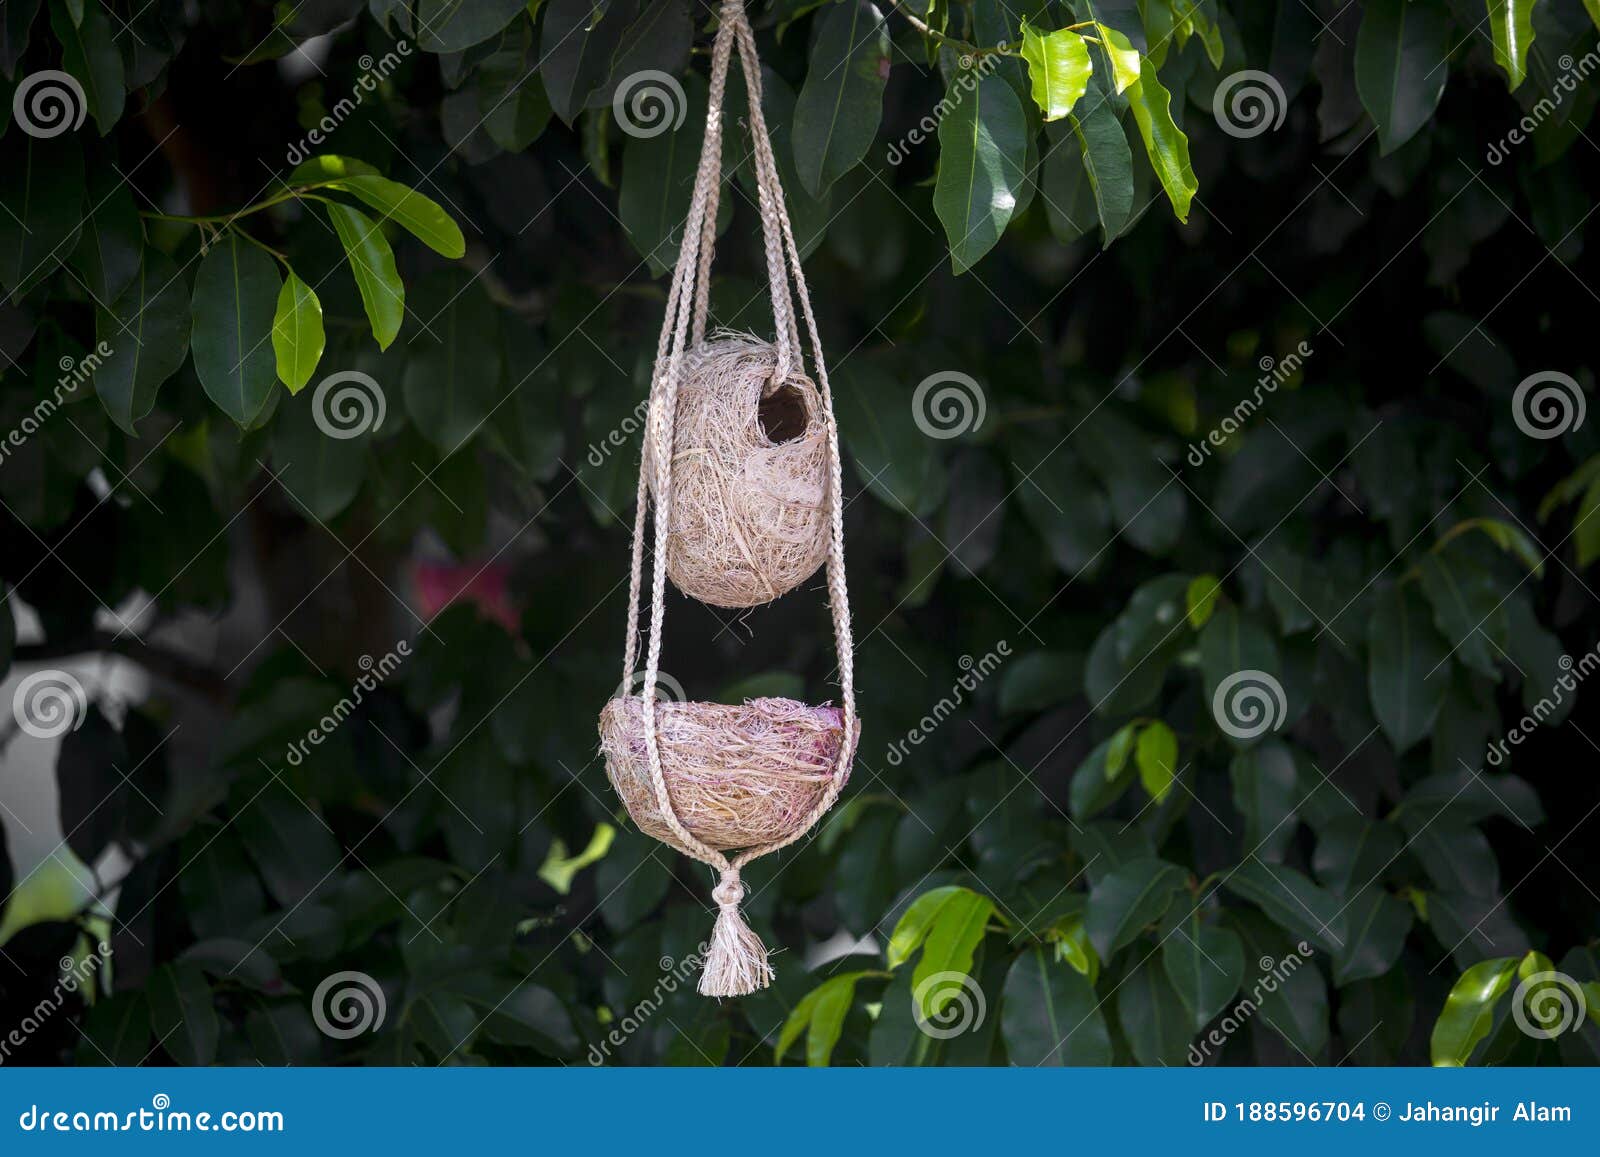 Handmade Birds Nest are Hanging on the Branches of Green Trees. Stock